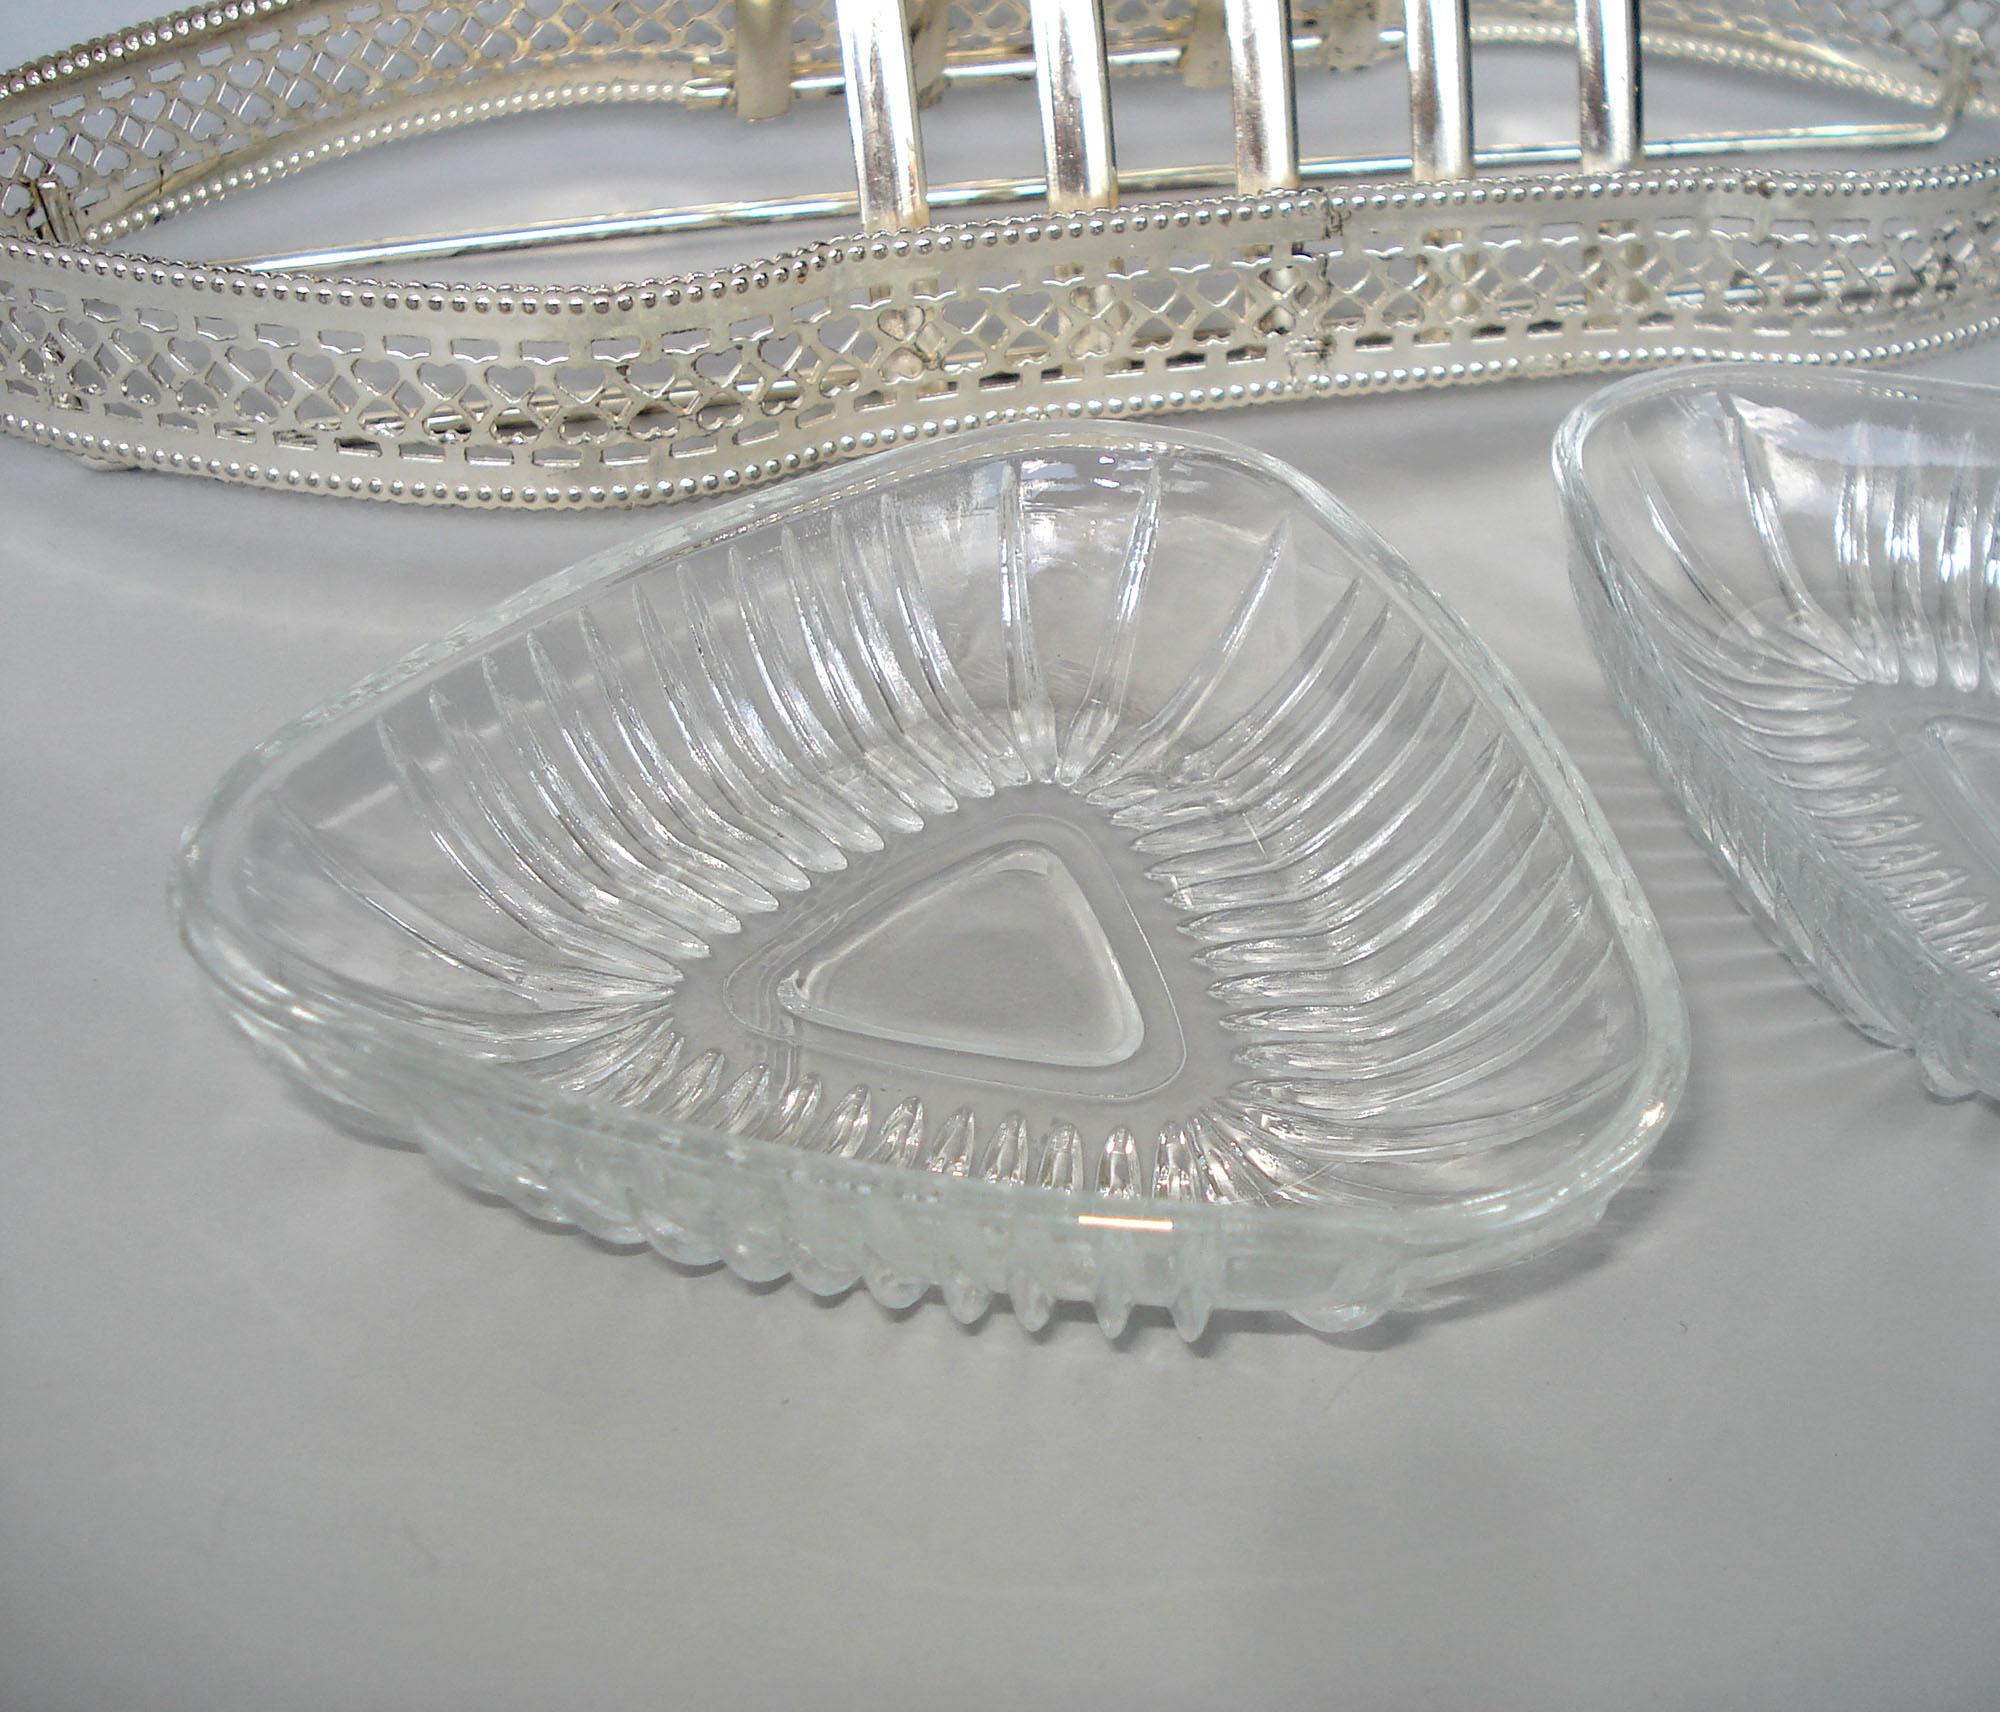 Plated Vintage French Art Deco Toast Rack with Jam and Butter Dishes